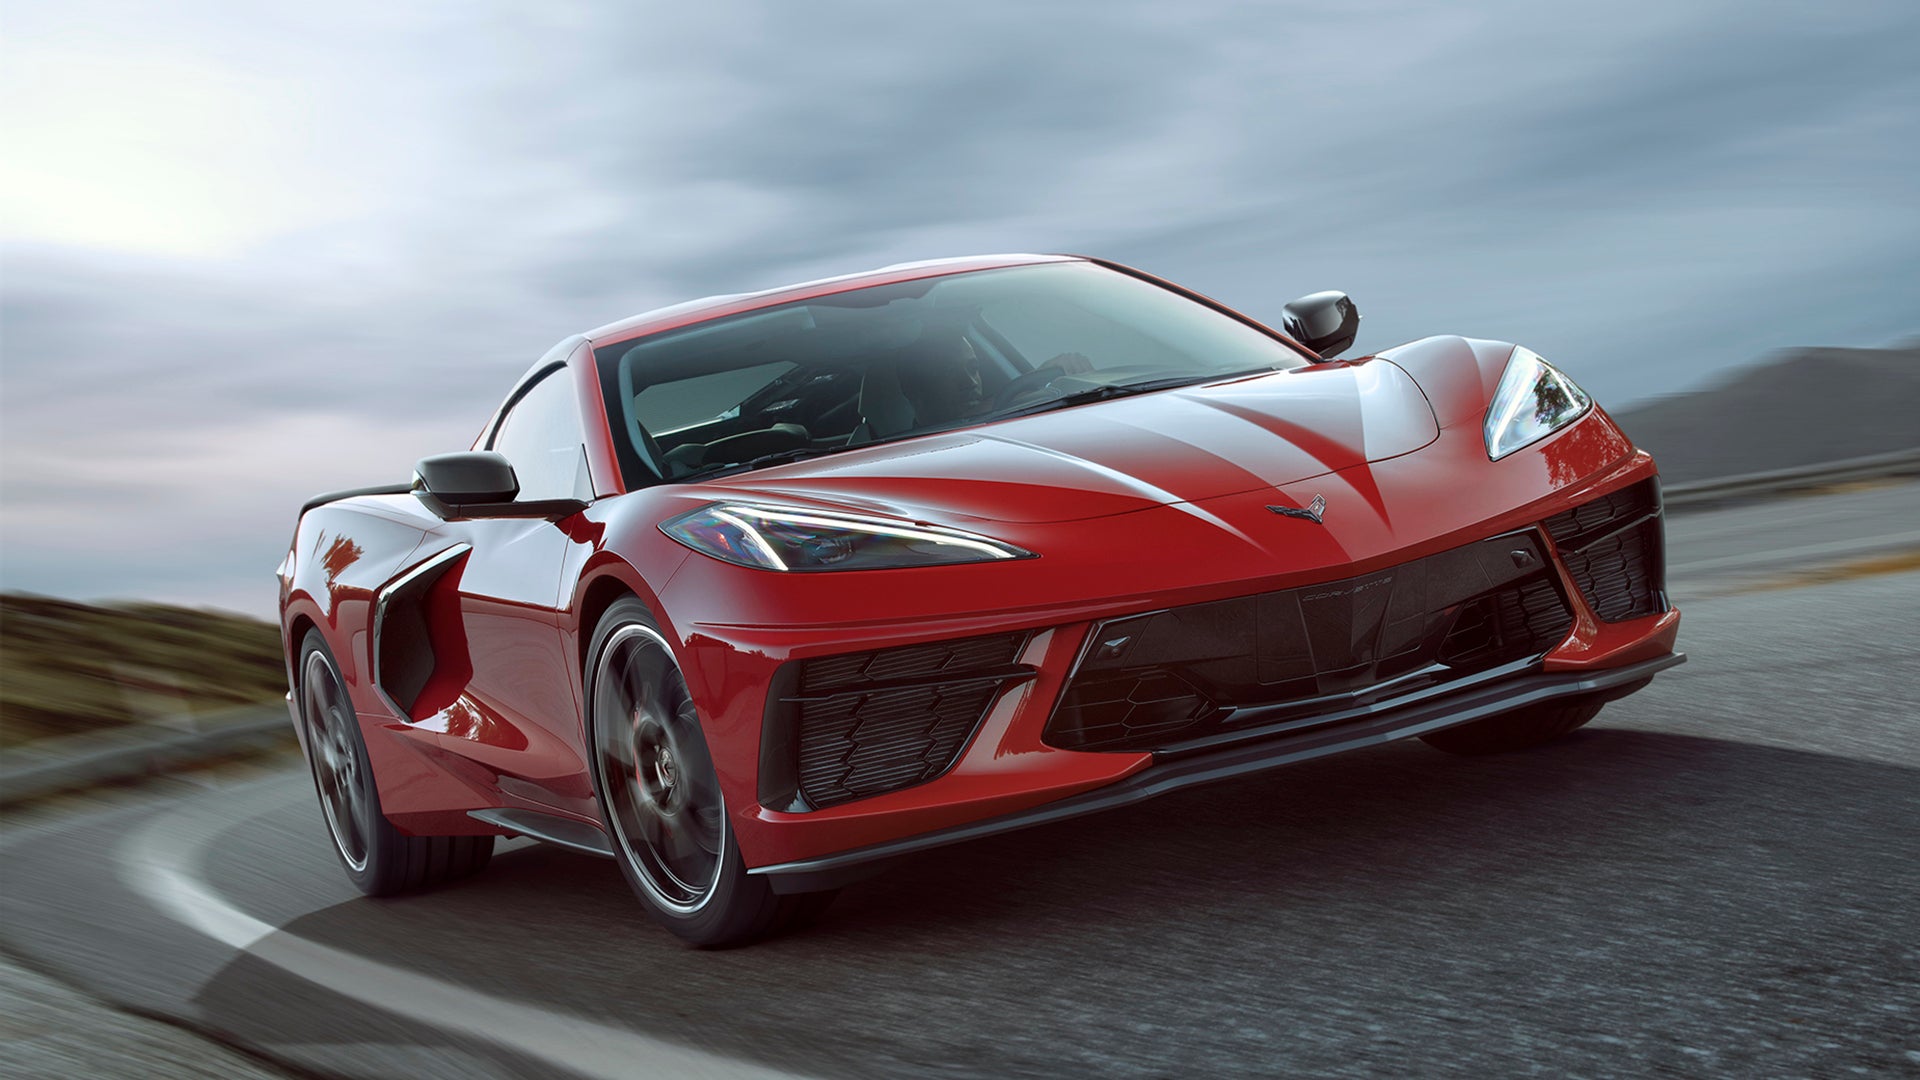 Here’s What Happened With <em>Motor Trend’s </em>Controversial 2020 Chevy Corvette Dyno Test